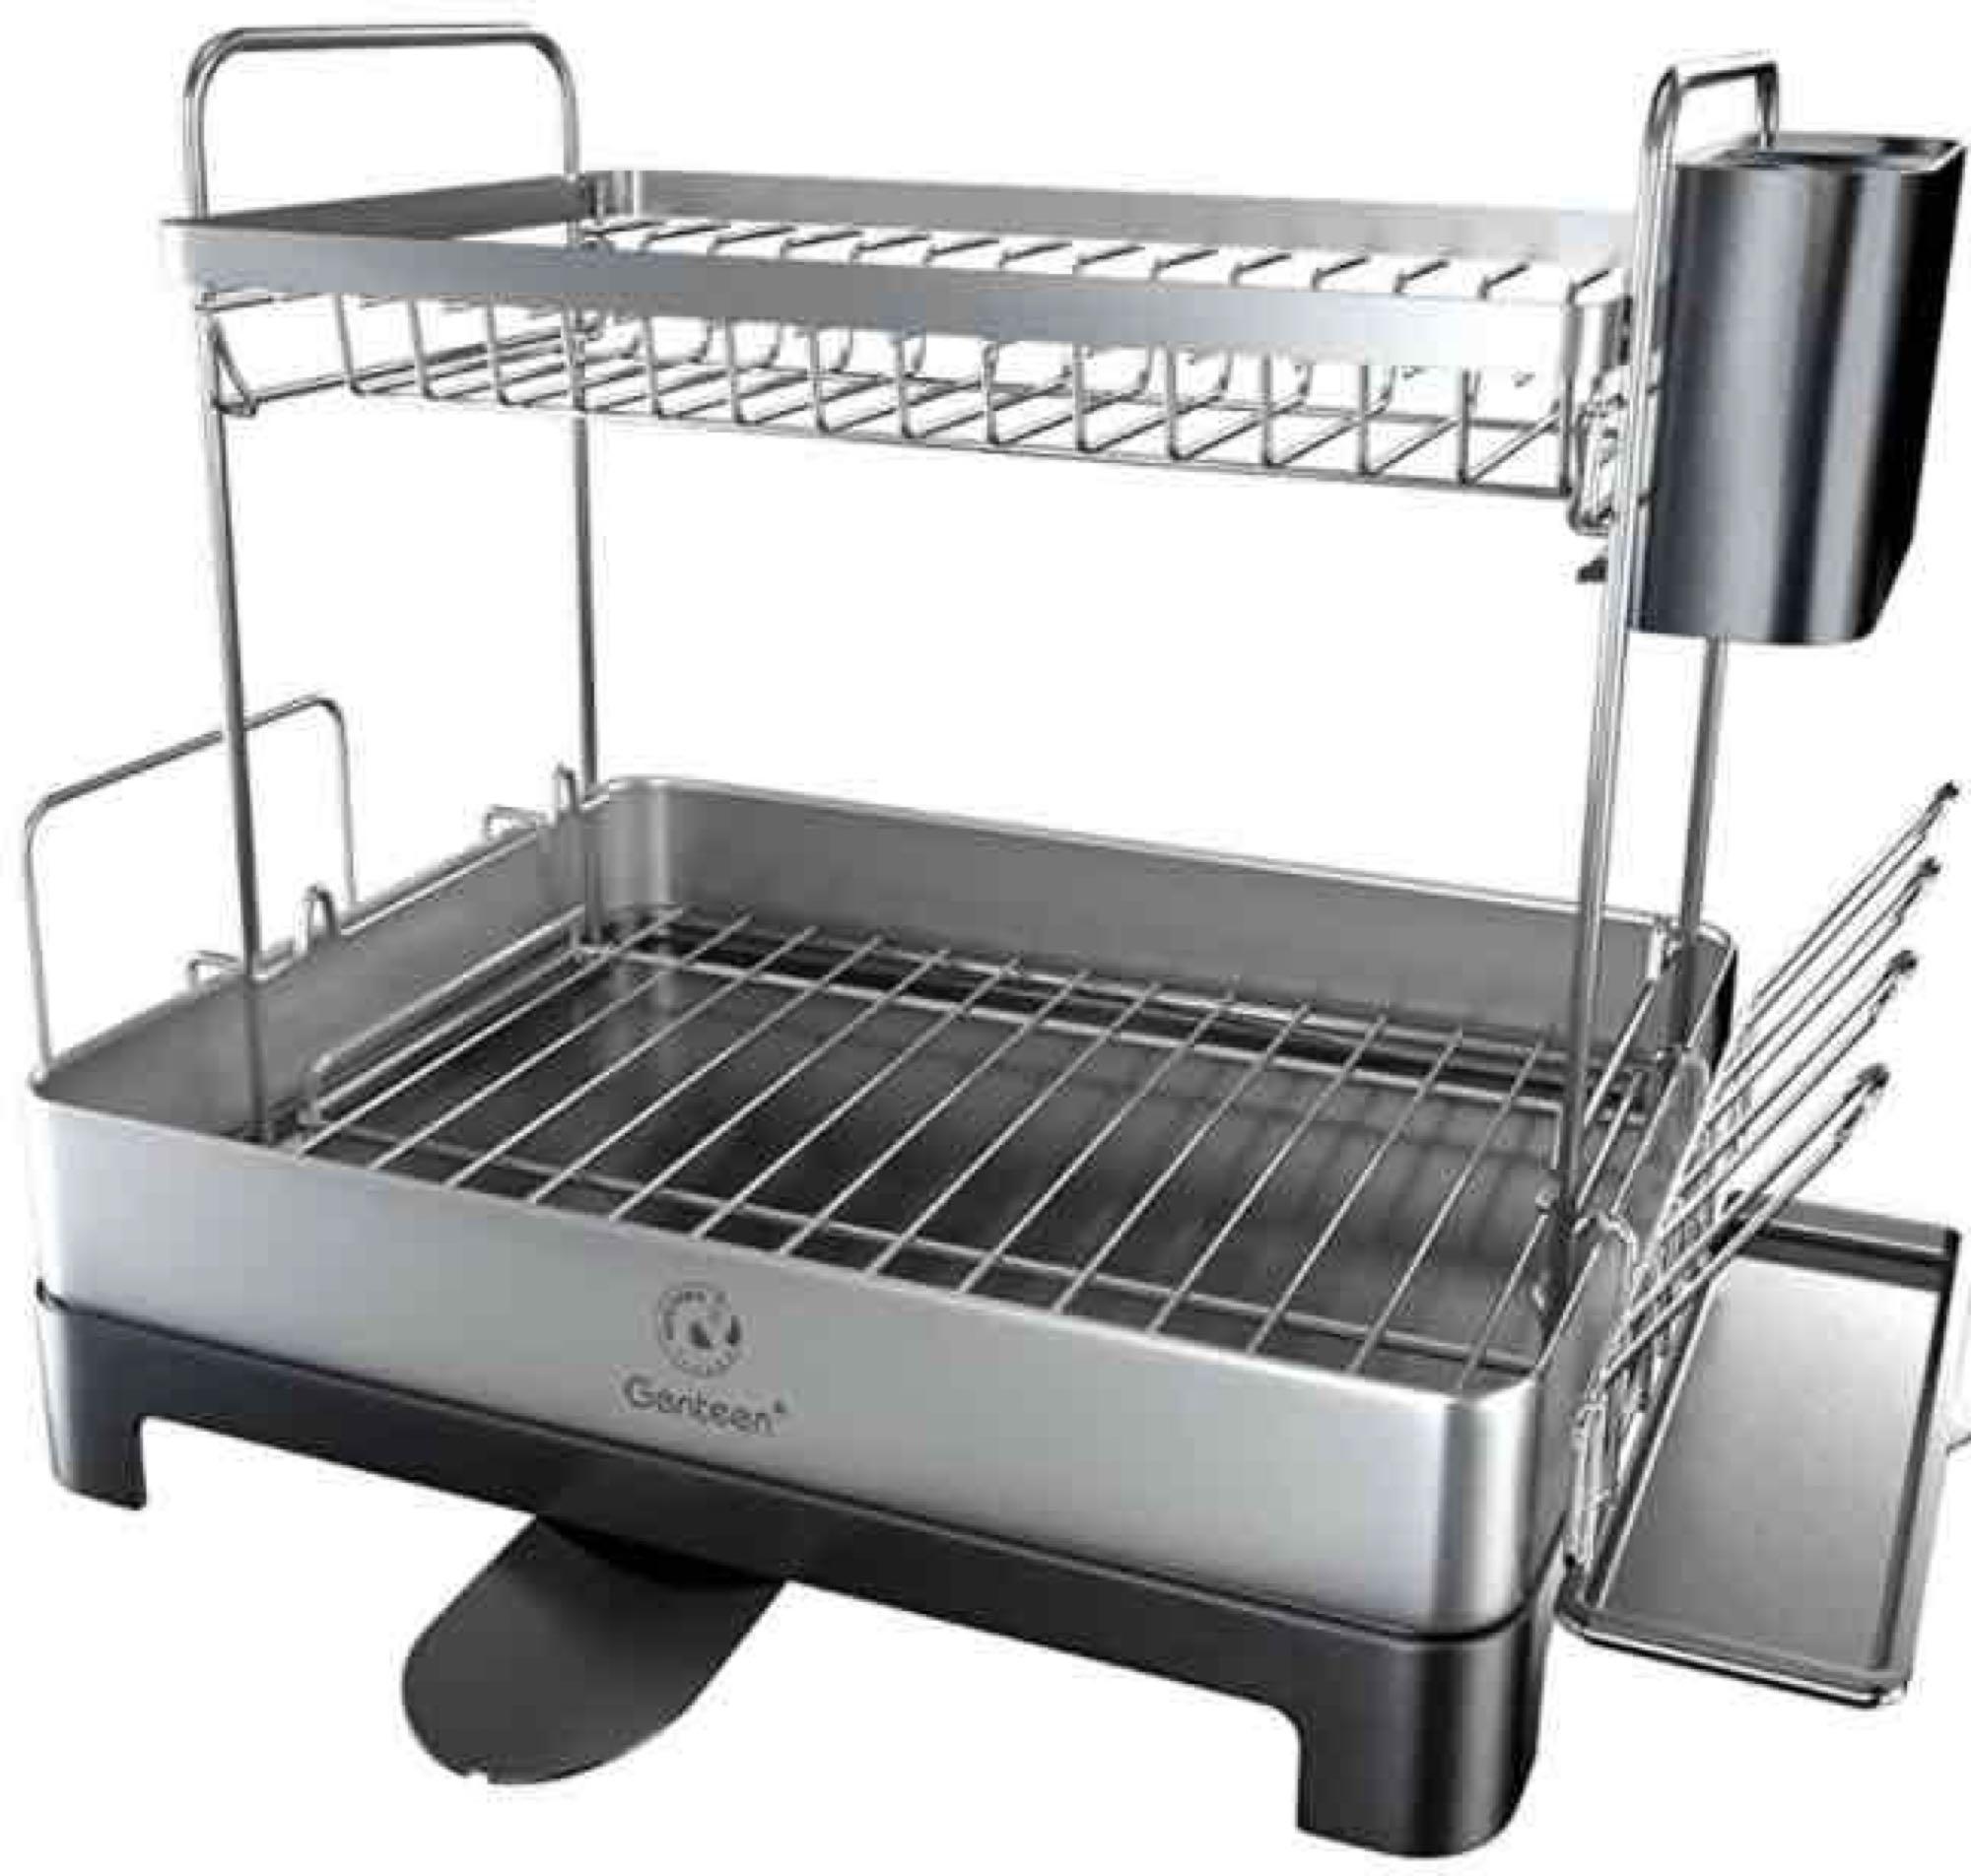 Qienrrae Dish Drying Rack with Drainboard, Stainless Steel One Tier-grey